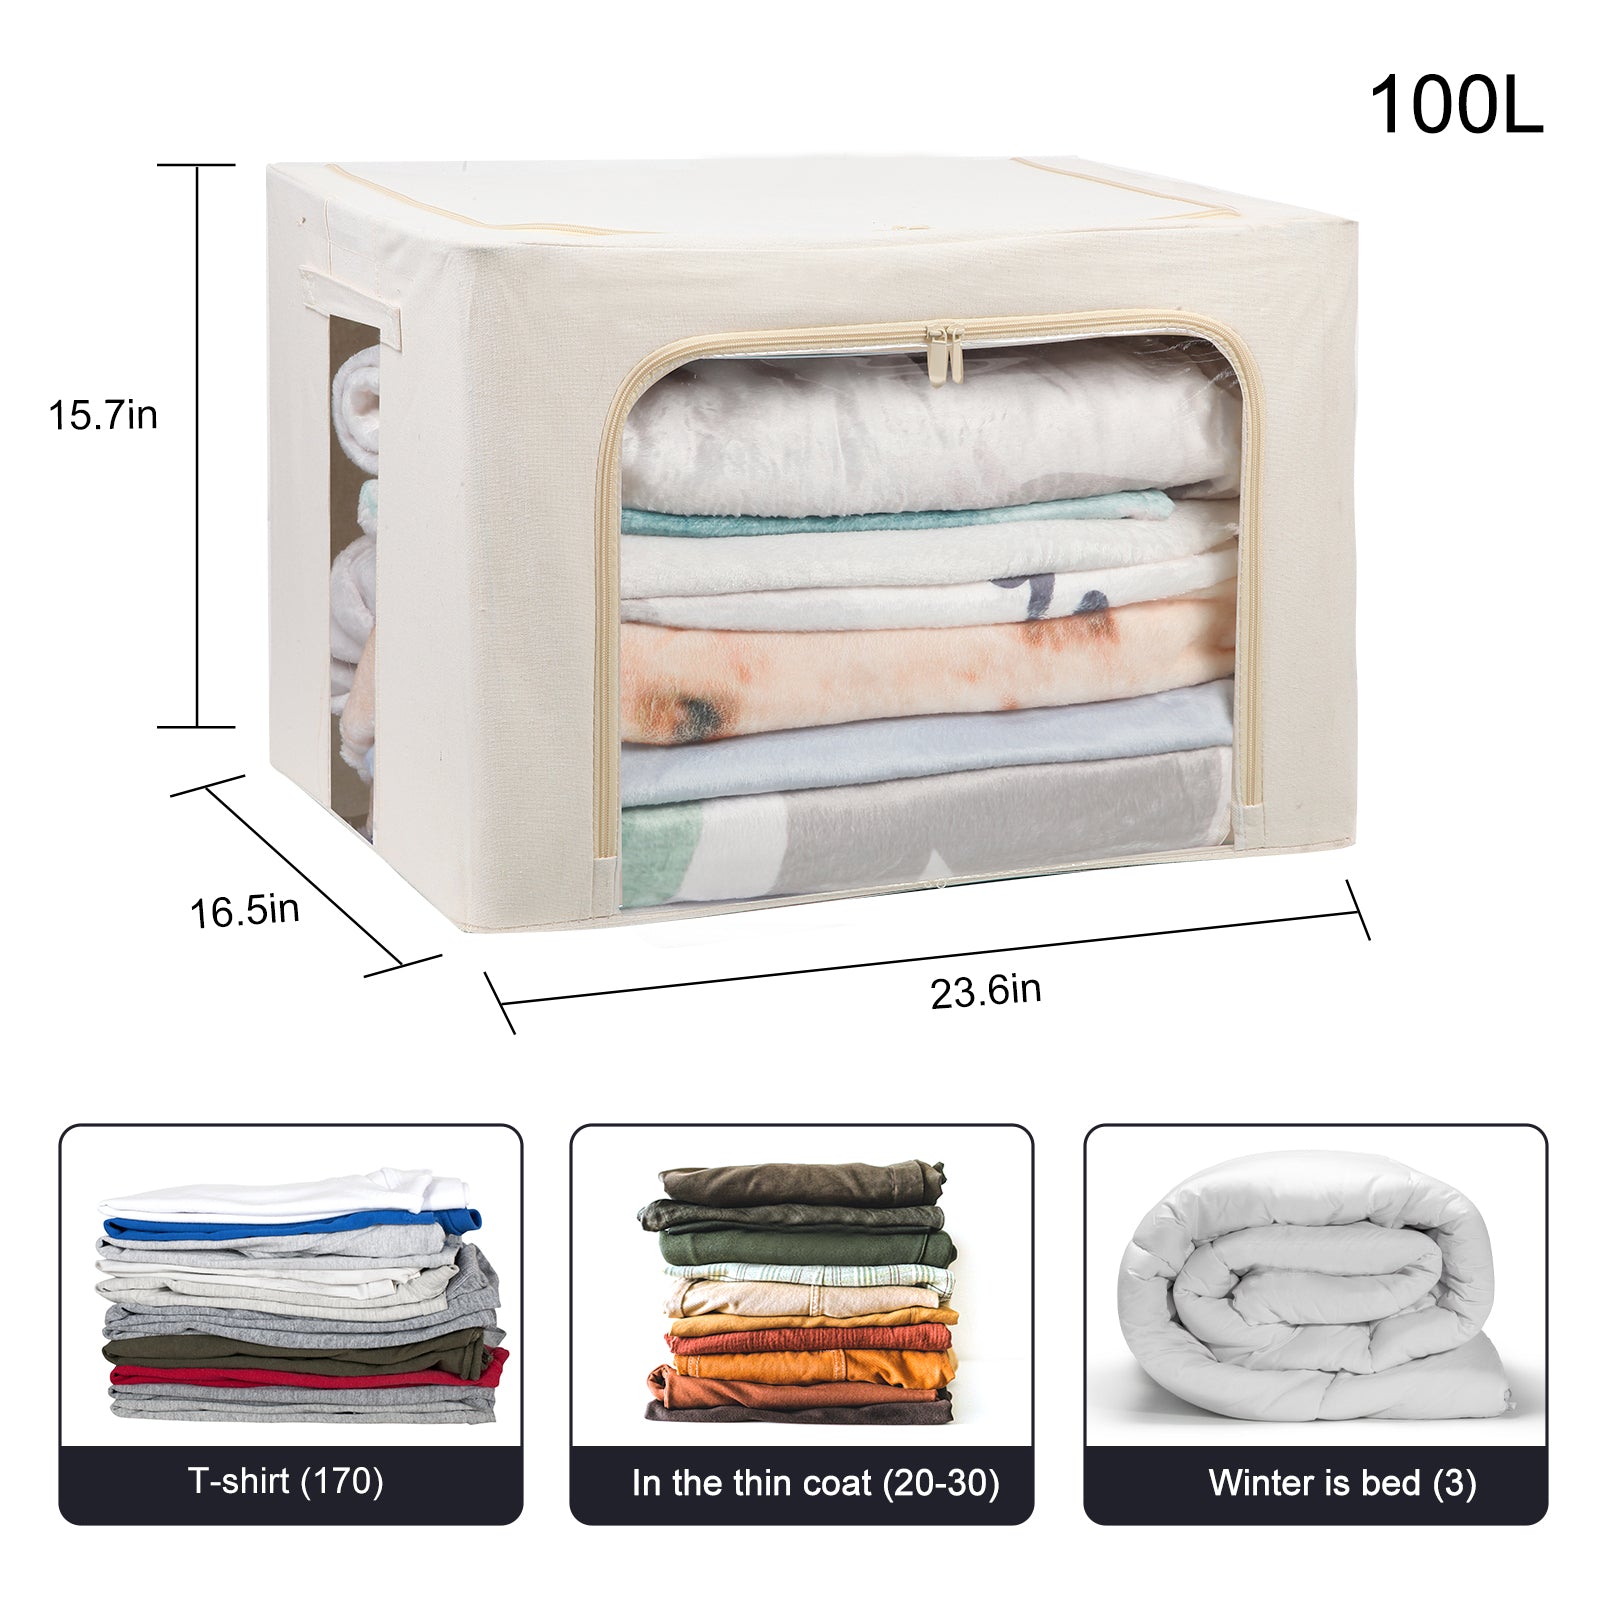 Bed Sheet Organizer - Foldable Storage Bins for Queen or King Size, Linen mate for Bedding, Clothes, Blankets - Ideal for Linen Closet with Zipper - 100L large closet organizer